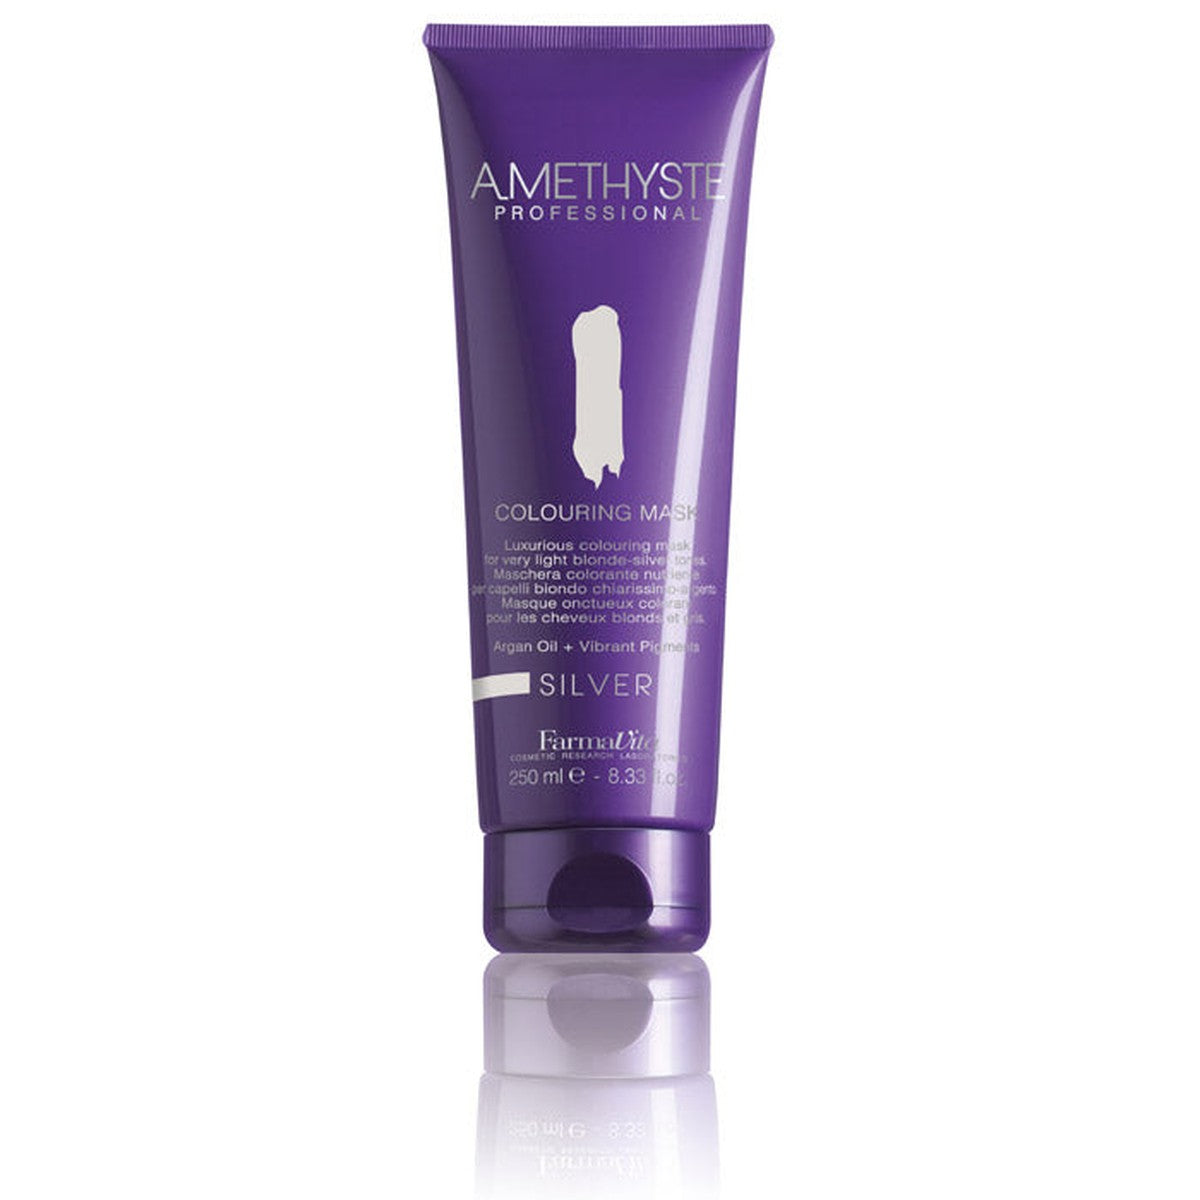 Amethyste Colouring Mask Silver 250ml-Finesthair